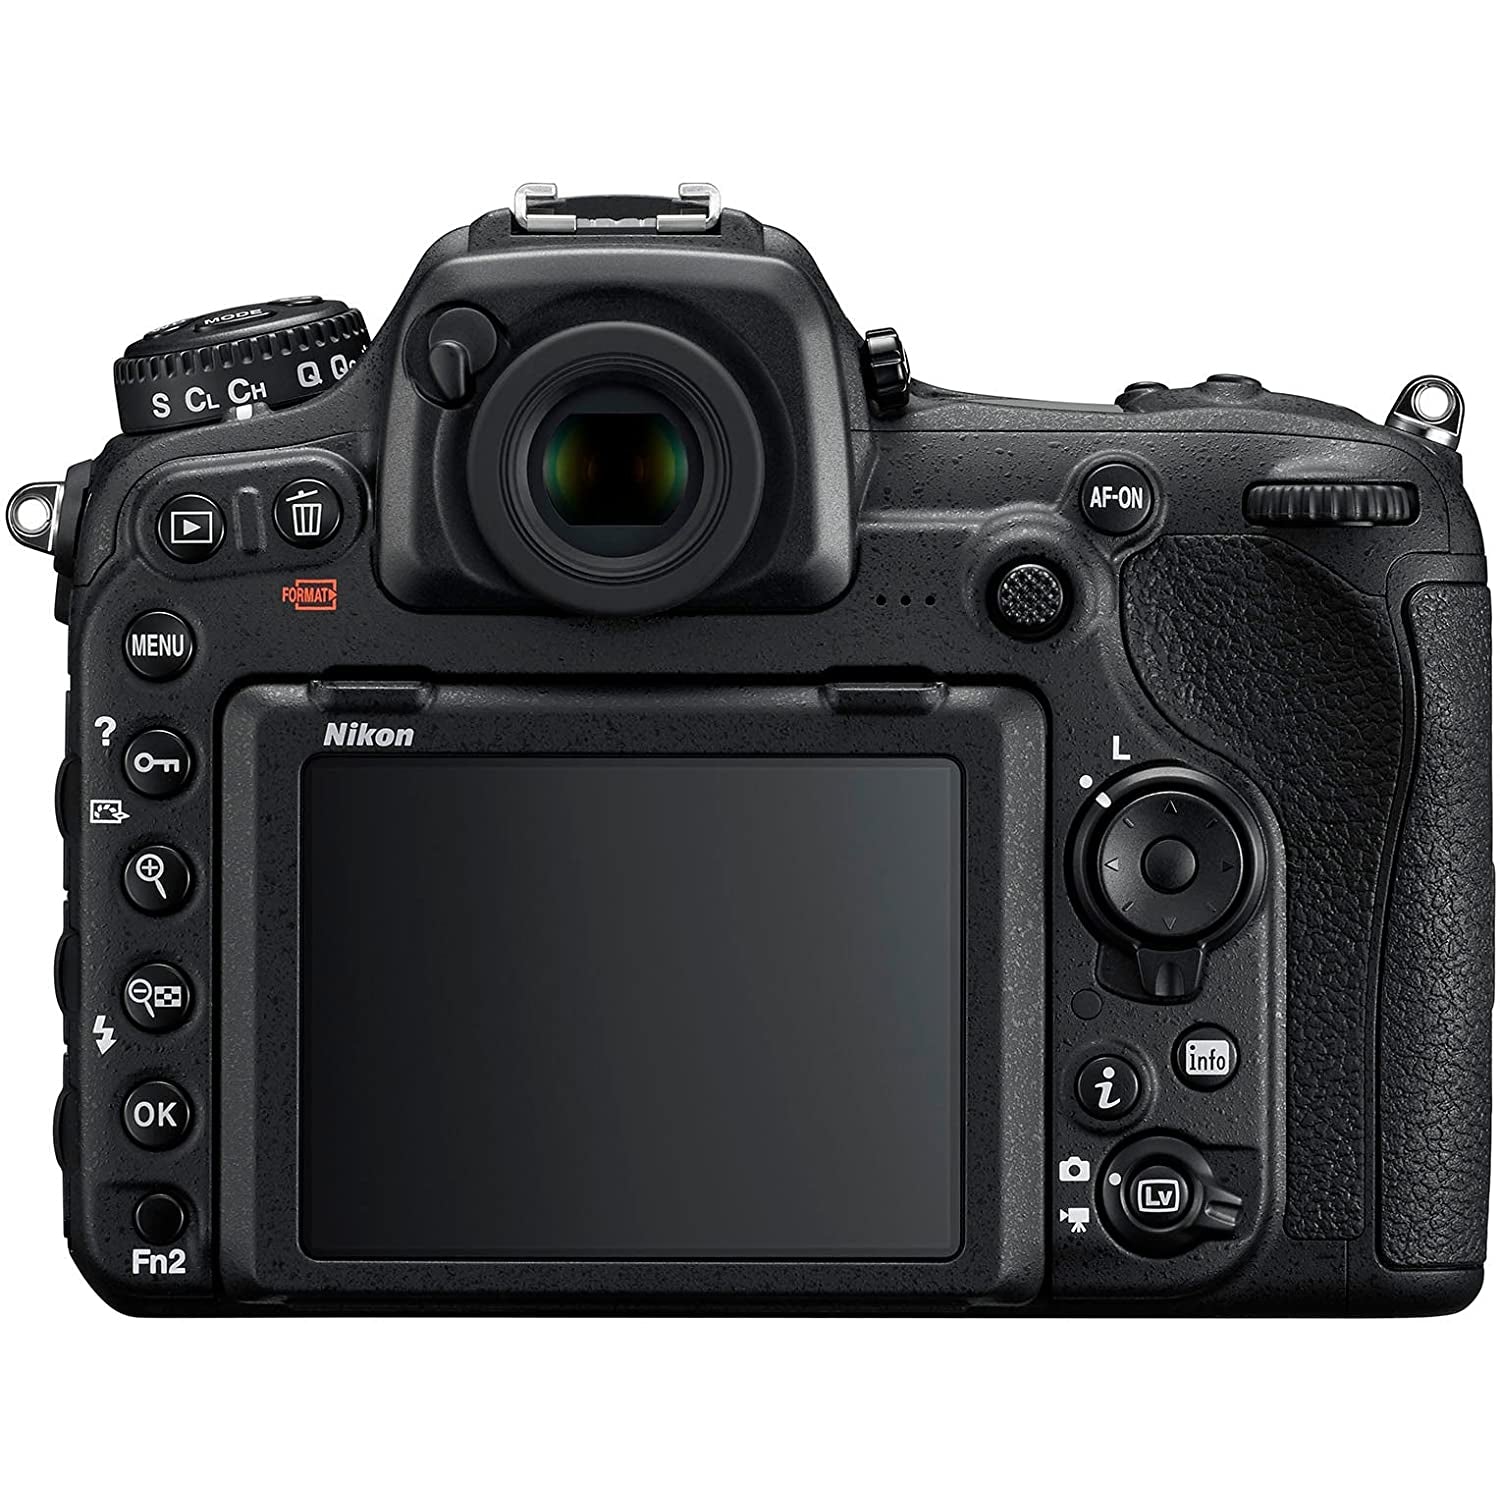 Nikon D500 Digital SLR Camera, 4K Ultra HD, 20.9MP With 3.2" Tiltable Touch Screen, Black, Body Only